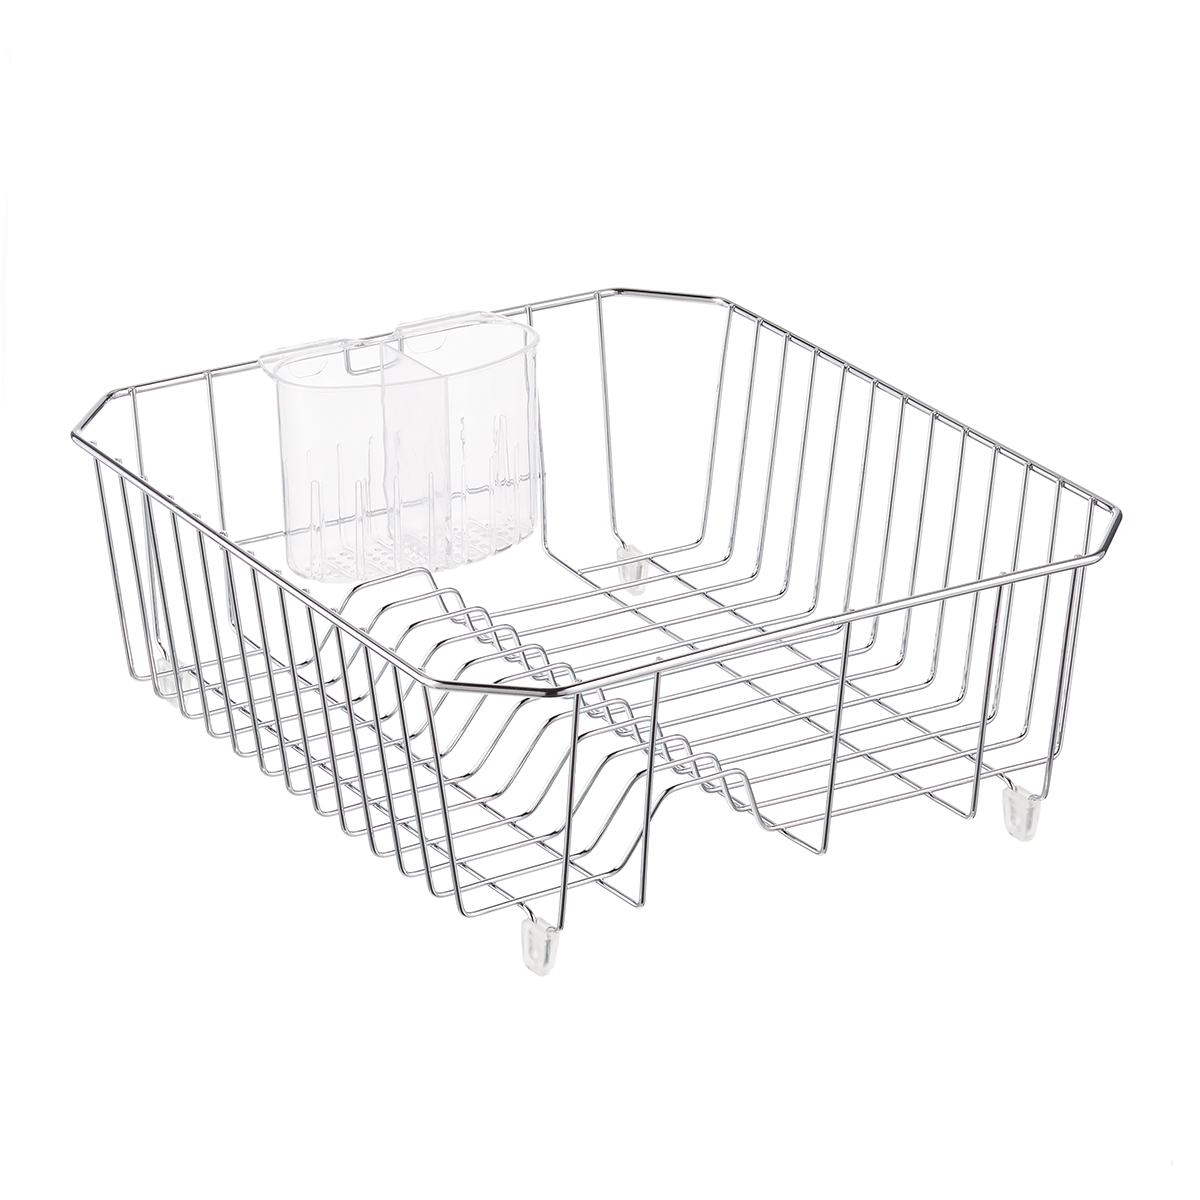 https://www.containerstore.com/catalogimages/373590/10078129-twin-sink-dish-drainer-chro.jpg